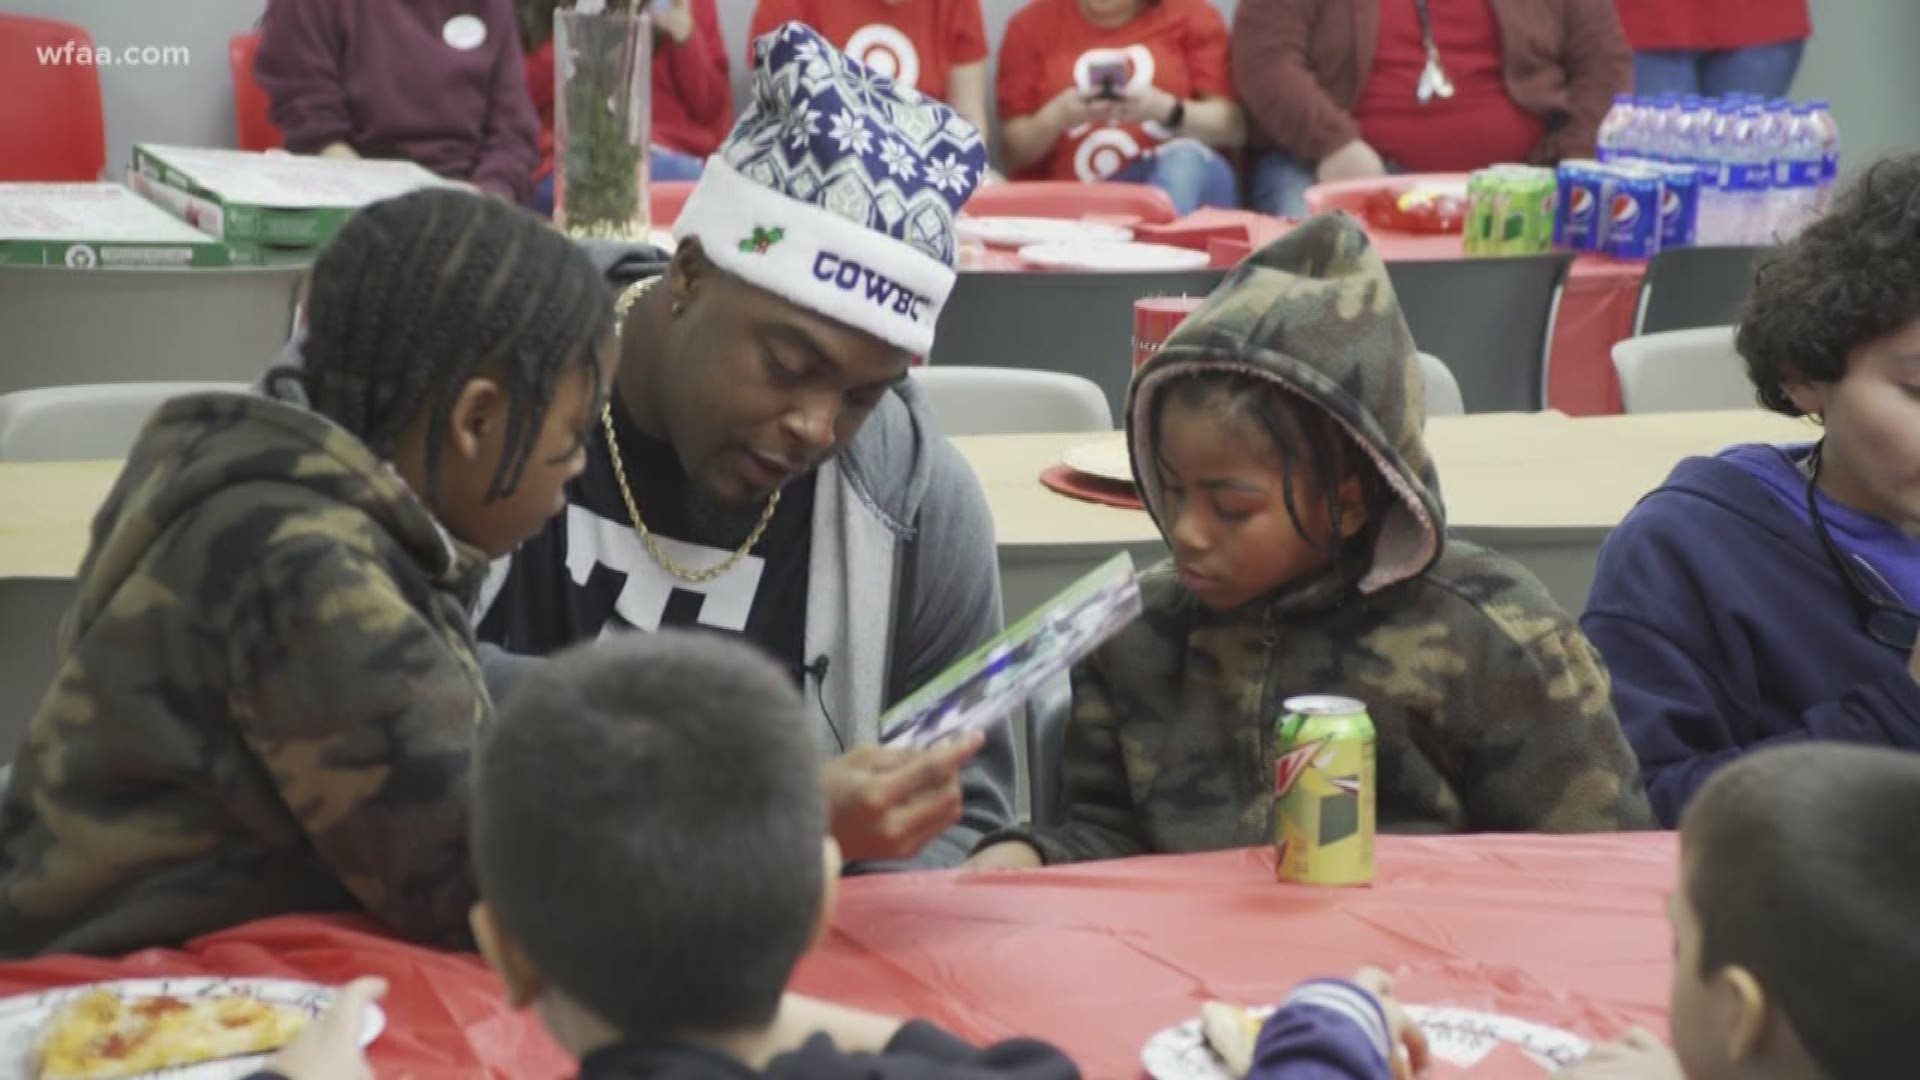 Some professional athletes are helping spread joy to children and families across North Texas this holiday season.